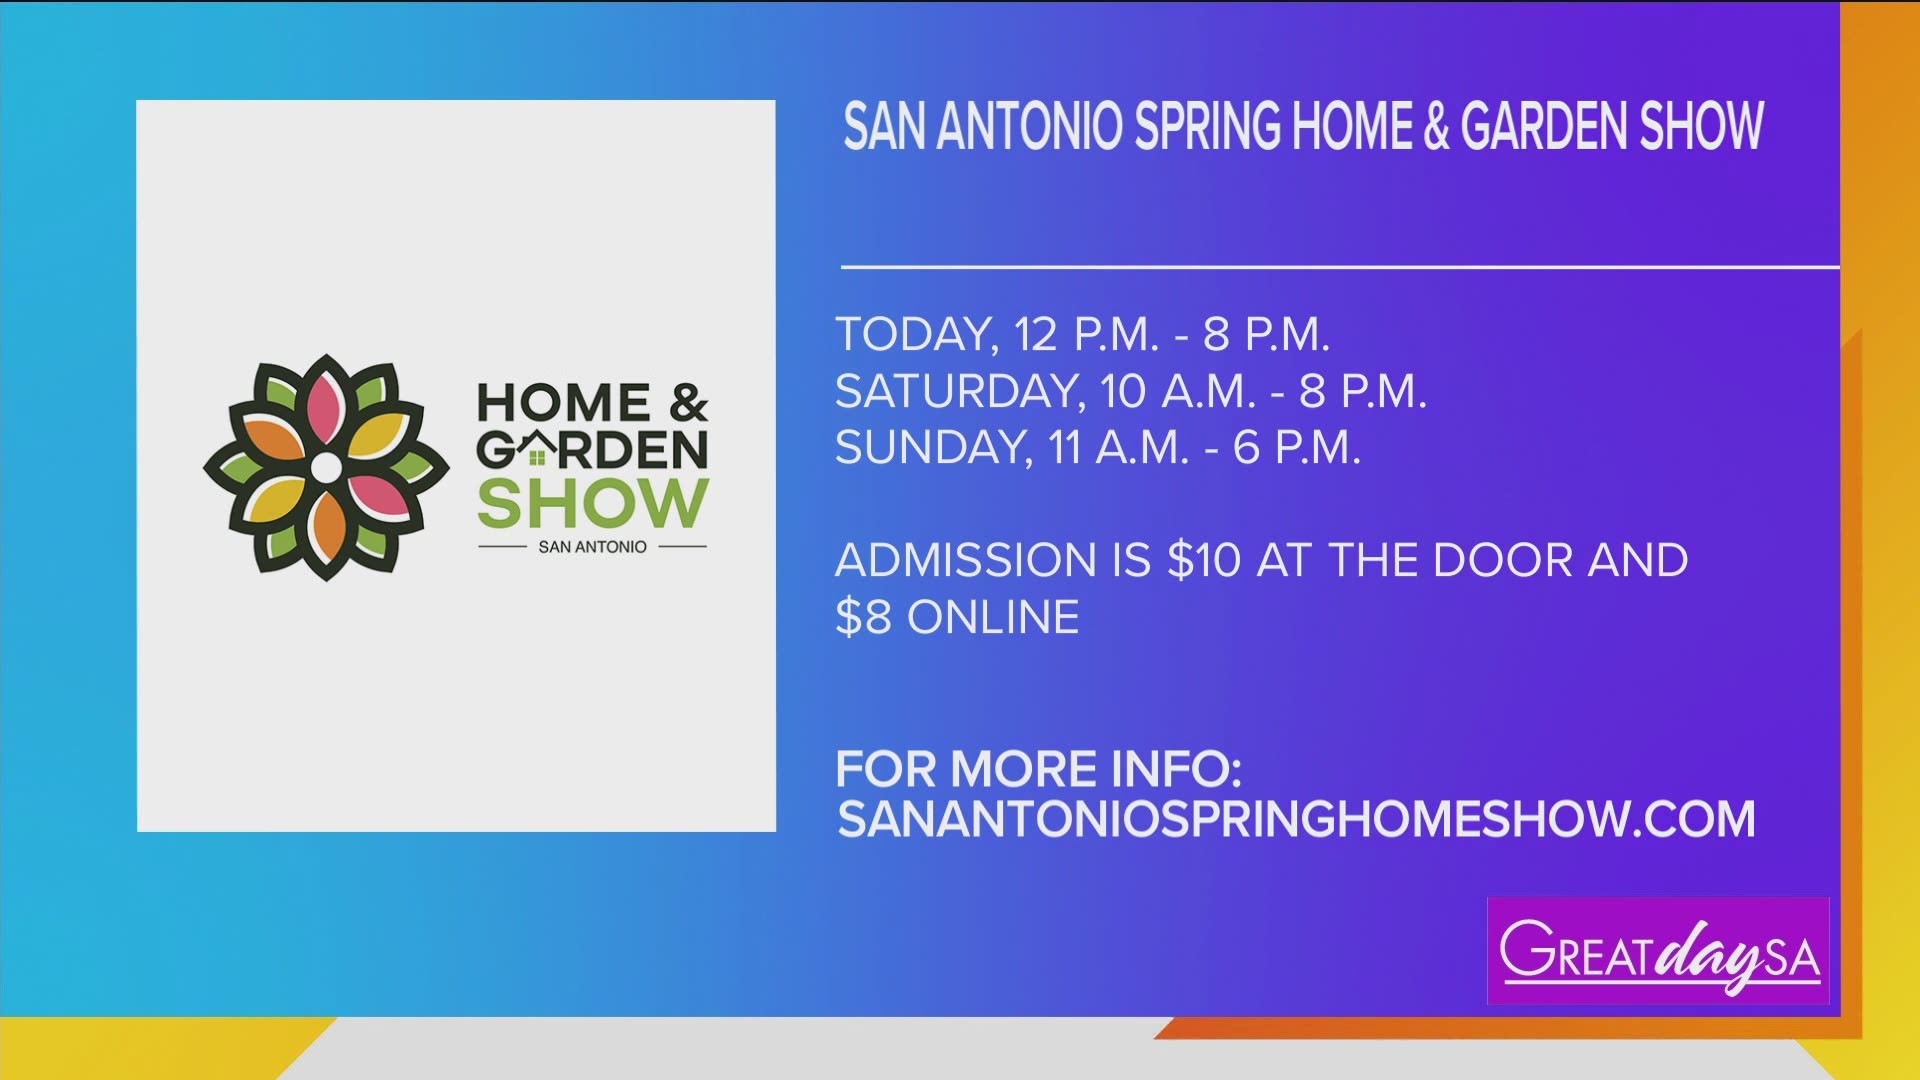 SA Home & Garden Show kicks off today at noon and continues on through Sunday!